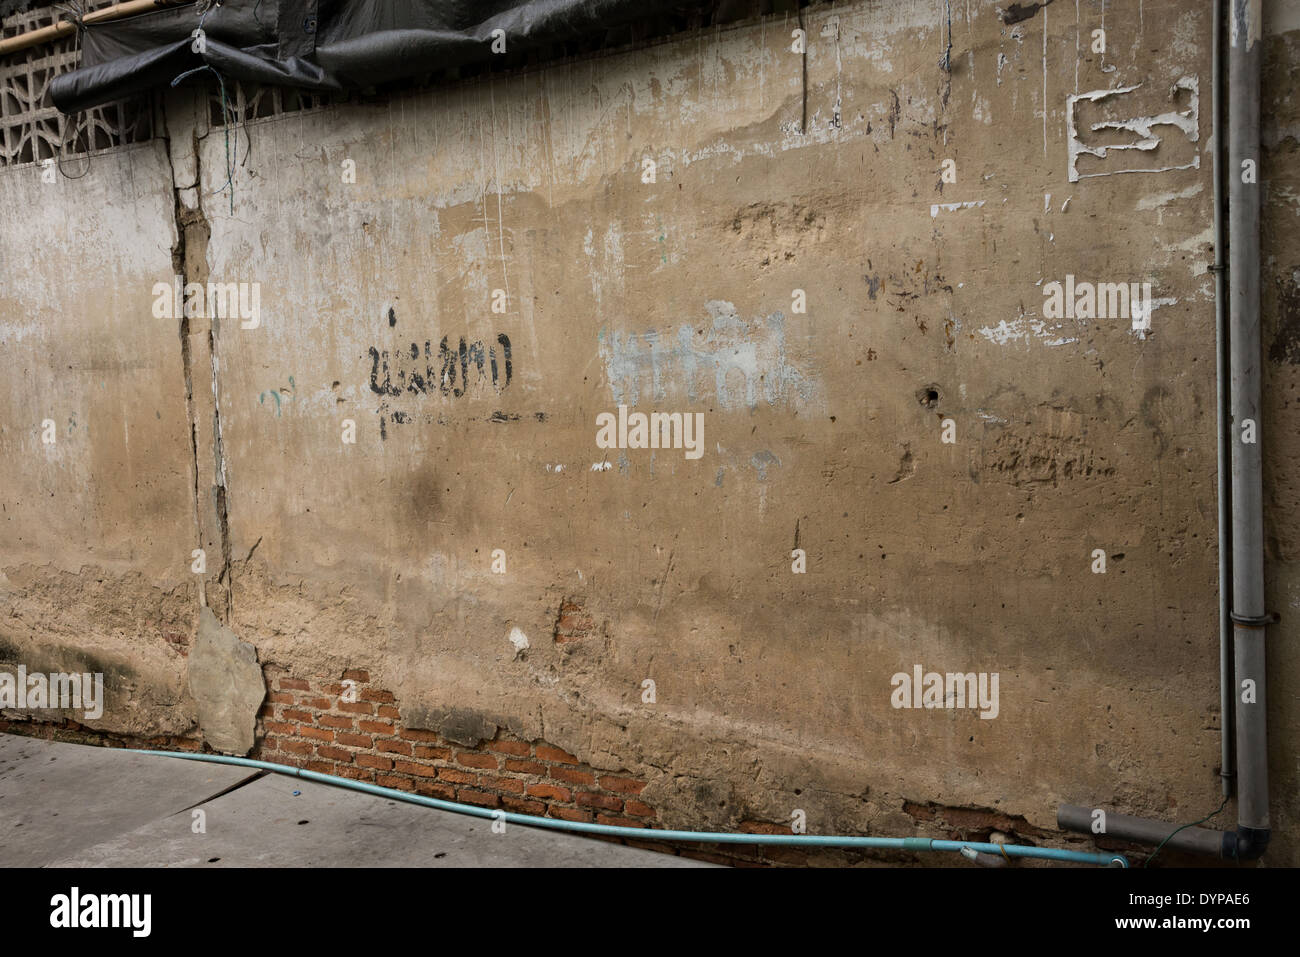 An old worn down brown wall with exposed bricks on the bottom, some Thai graffiti words written on it. Stock Photo